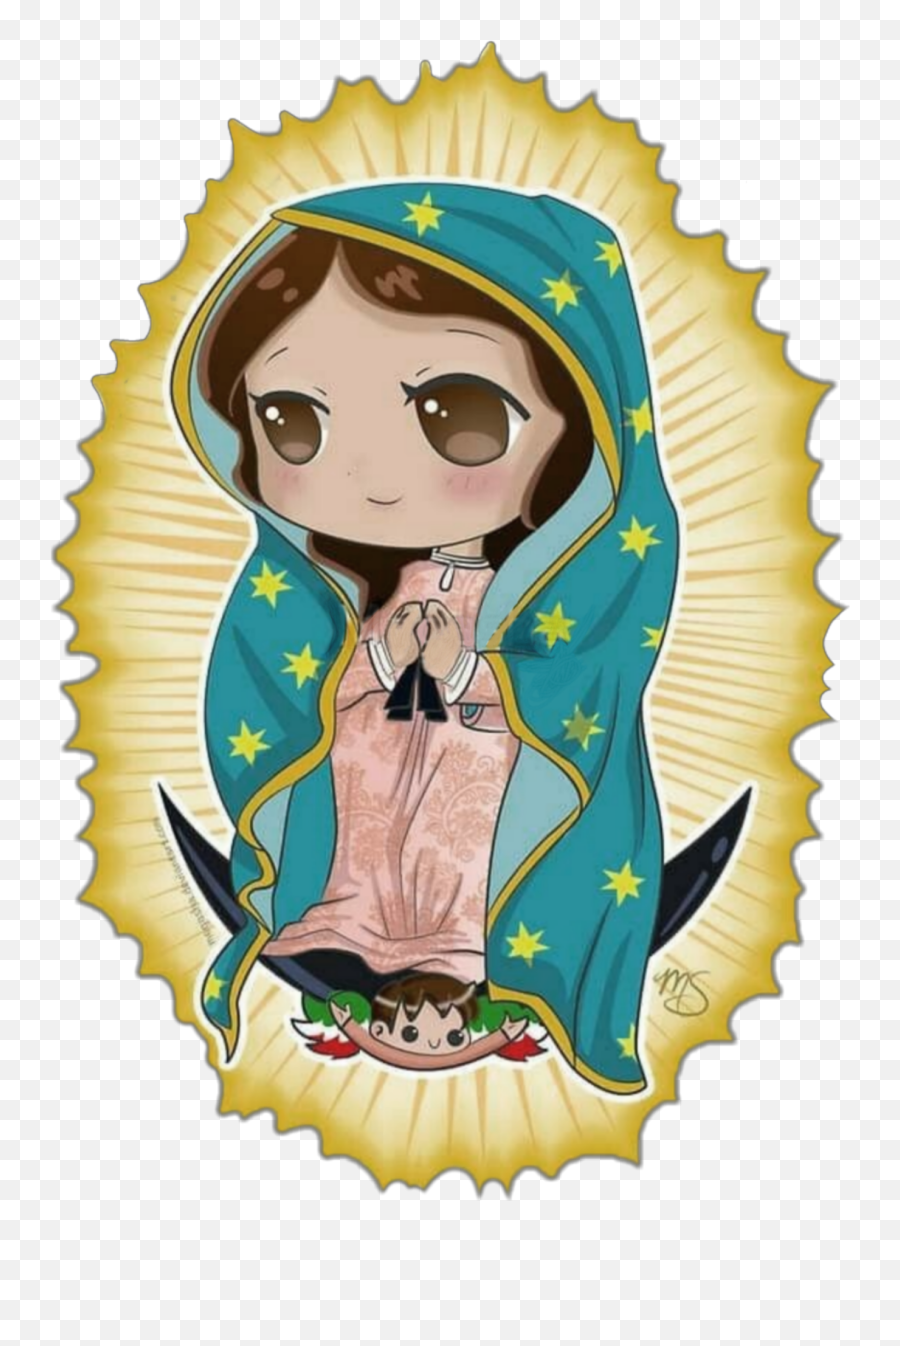 The Most Edited Guadalupe Picsart - Our Lady Of Guadalupe Chibi Emoji,App Emojis Católicos